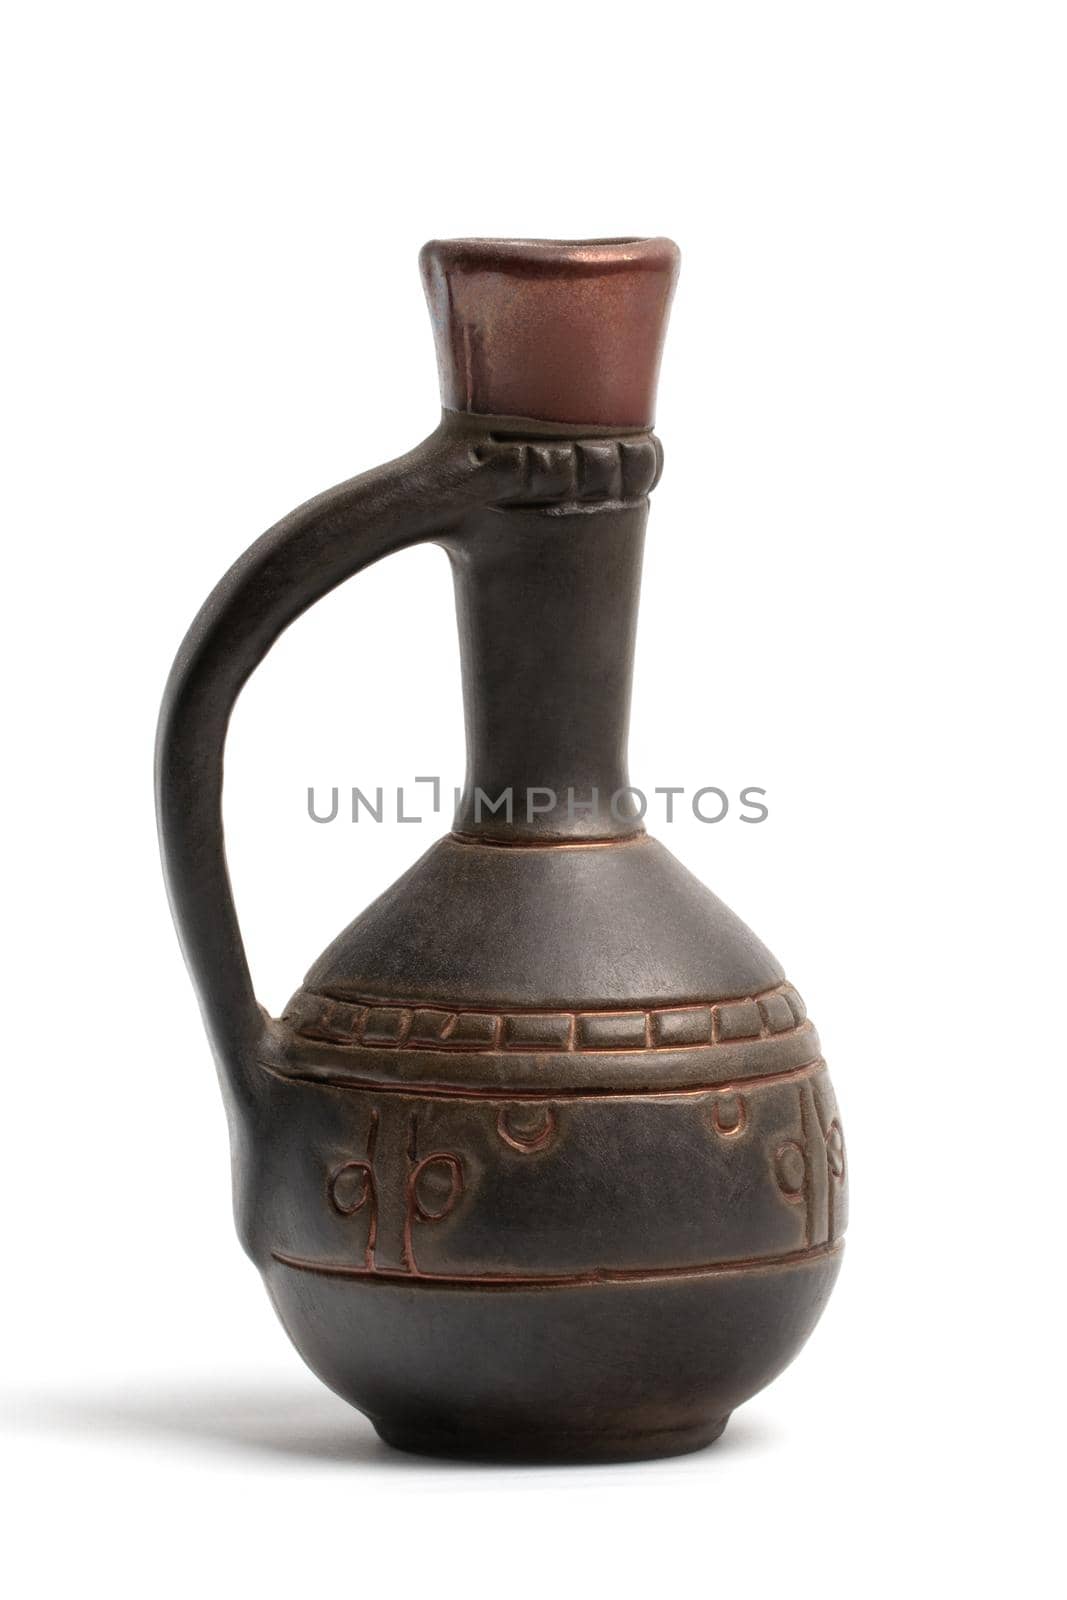 A small brown clay jug with patterns and a narrow high neck close-up view isolated on a white background.